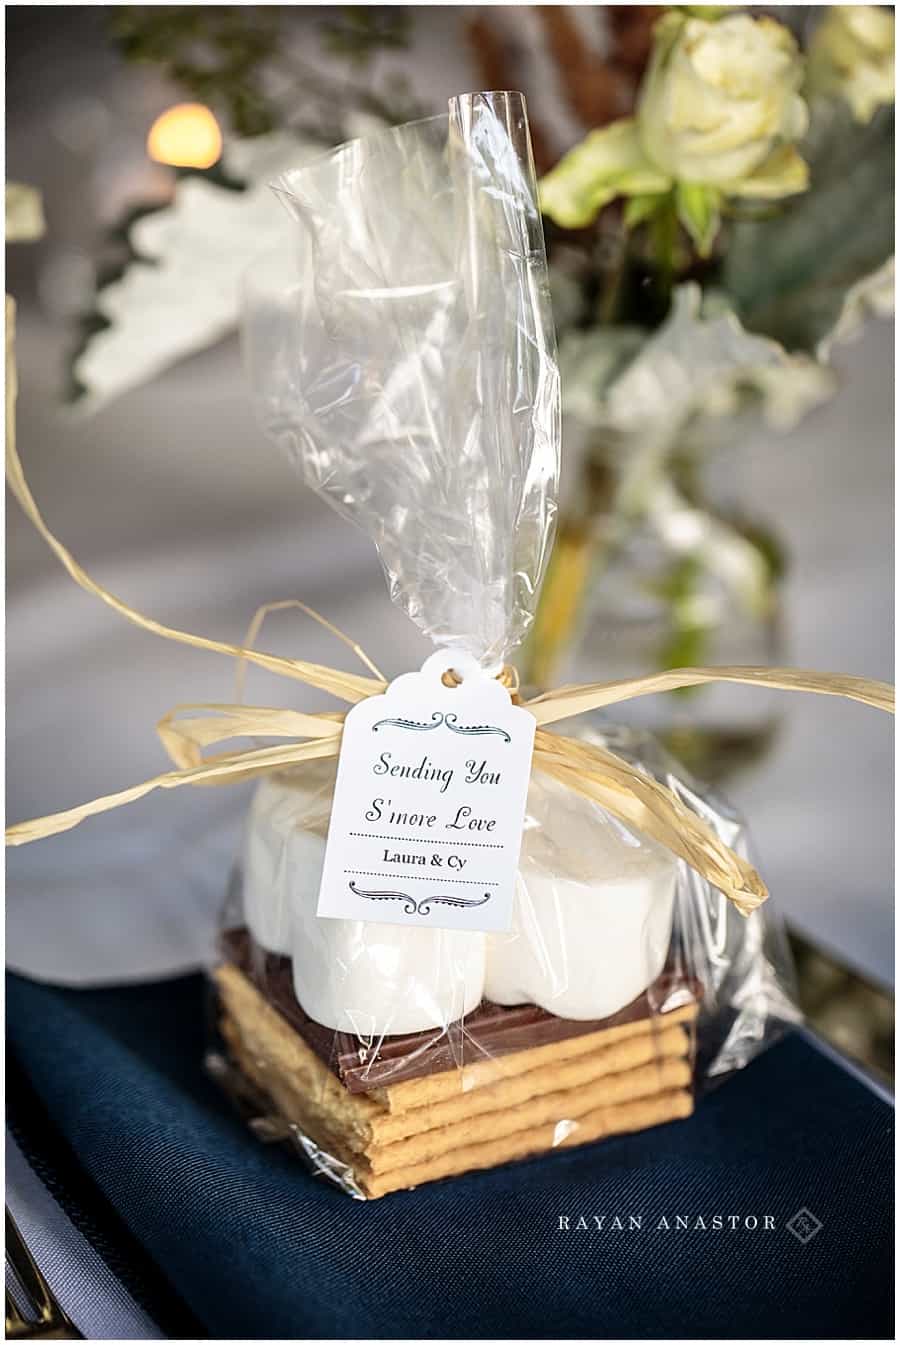 s'mores from bride and groom at table setting